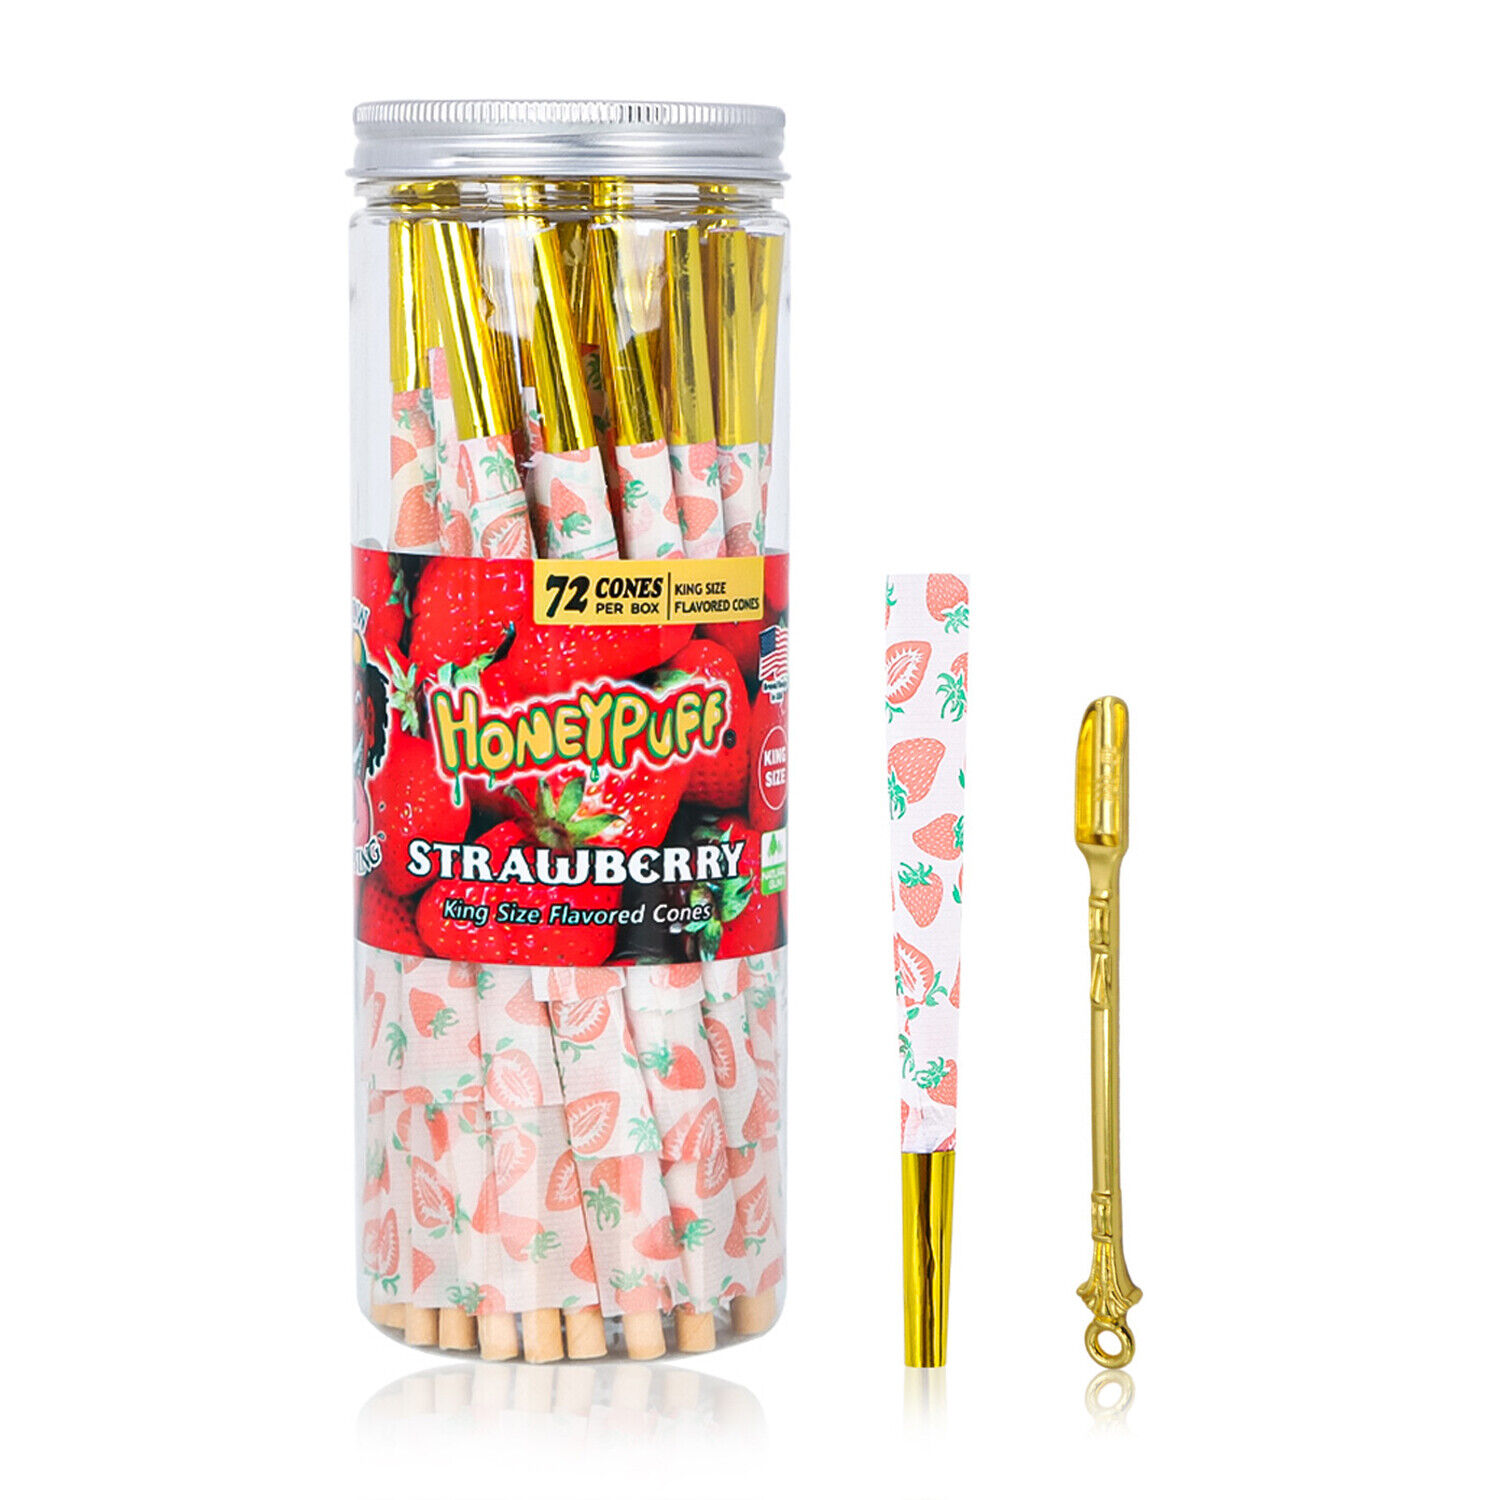 HONEYPUFF Pre Rolled Cones | 72 Pack | Fruit Flavored Pre Rolls & Gold Accessory